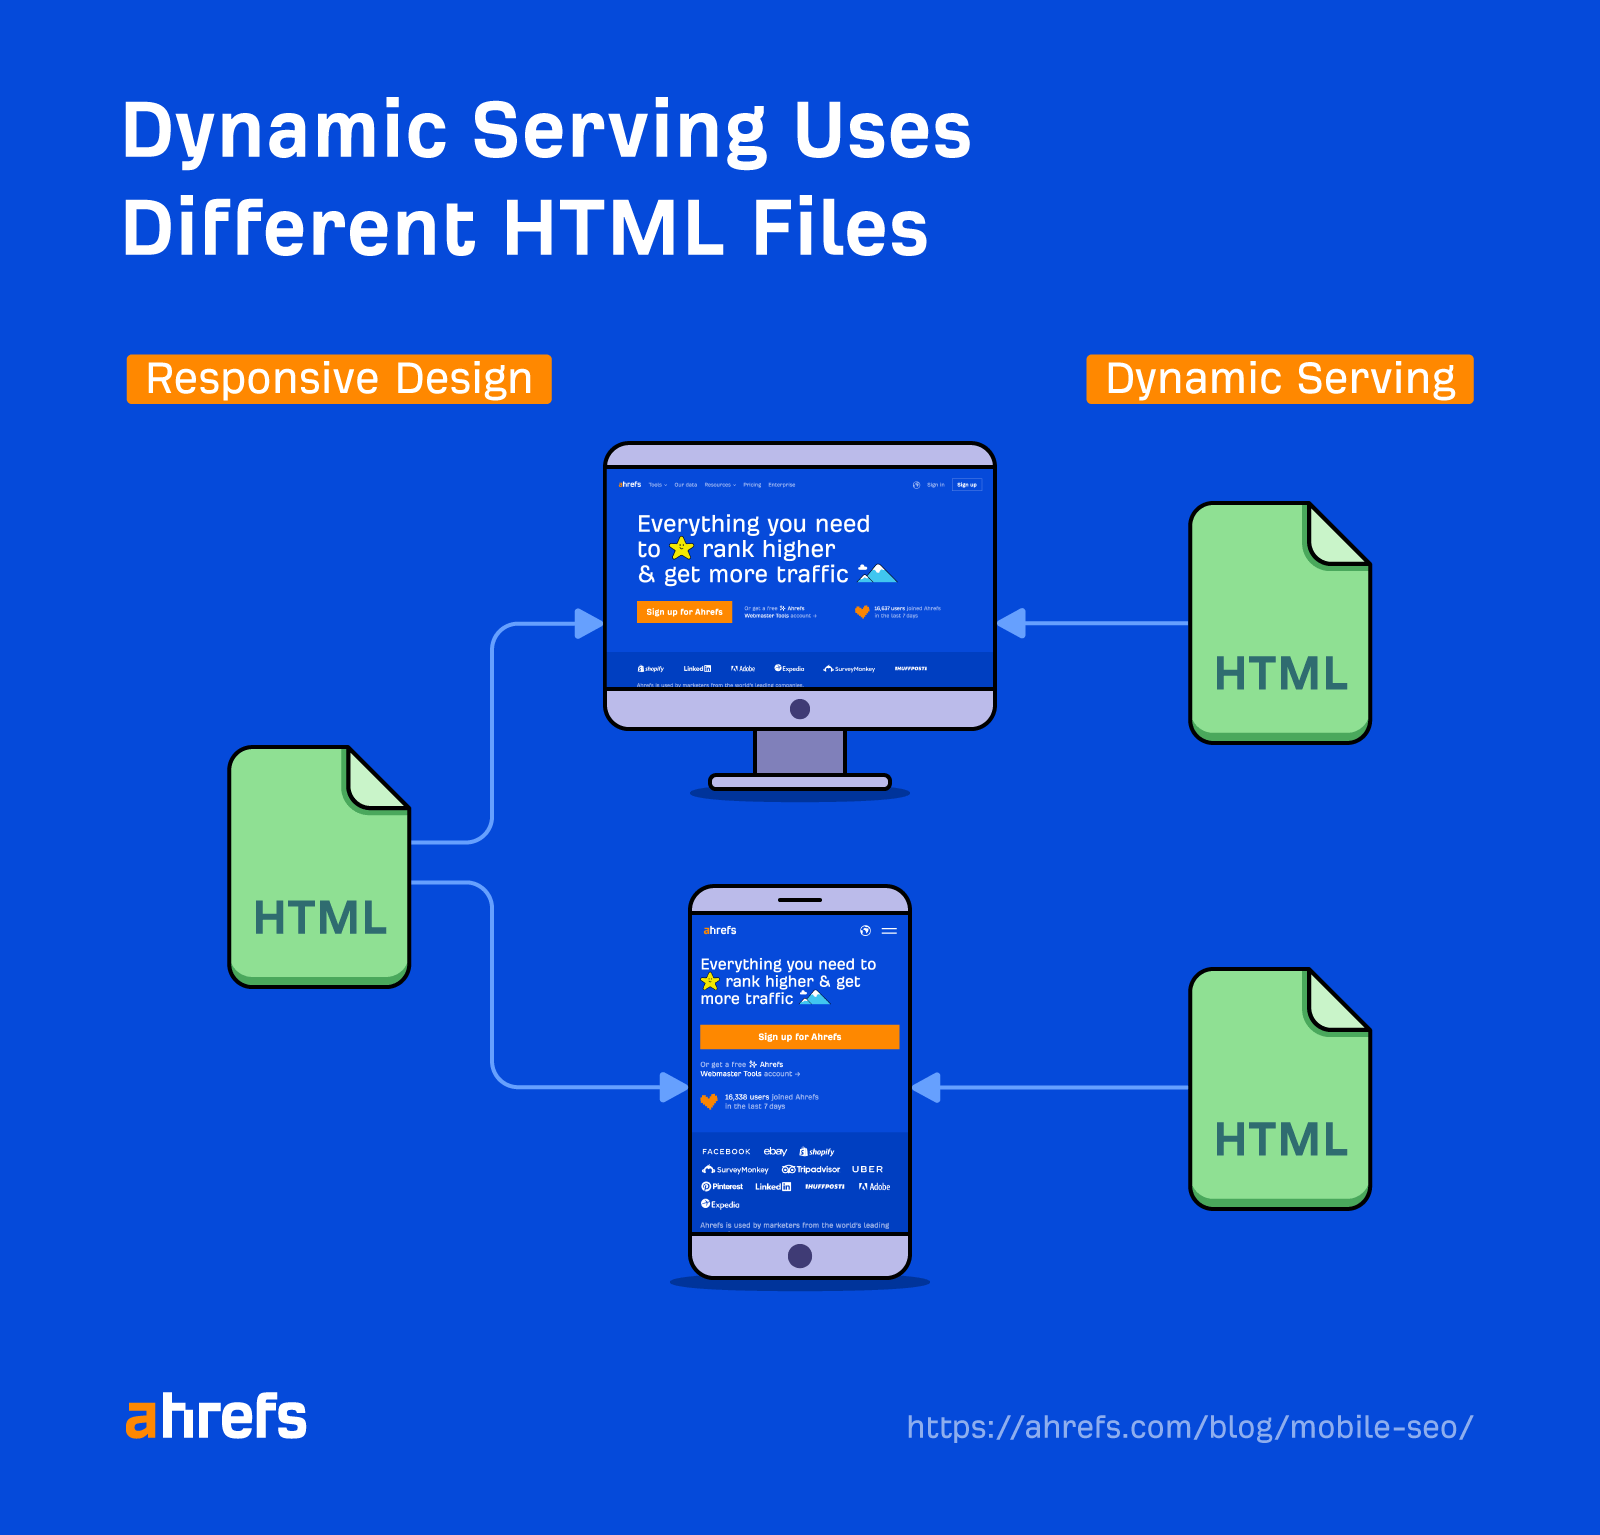 Dynamic serving serves separate HTML files by device
